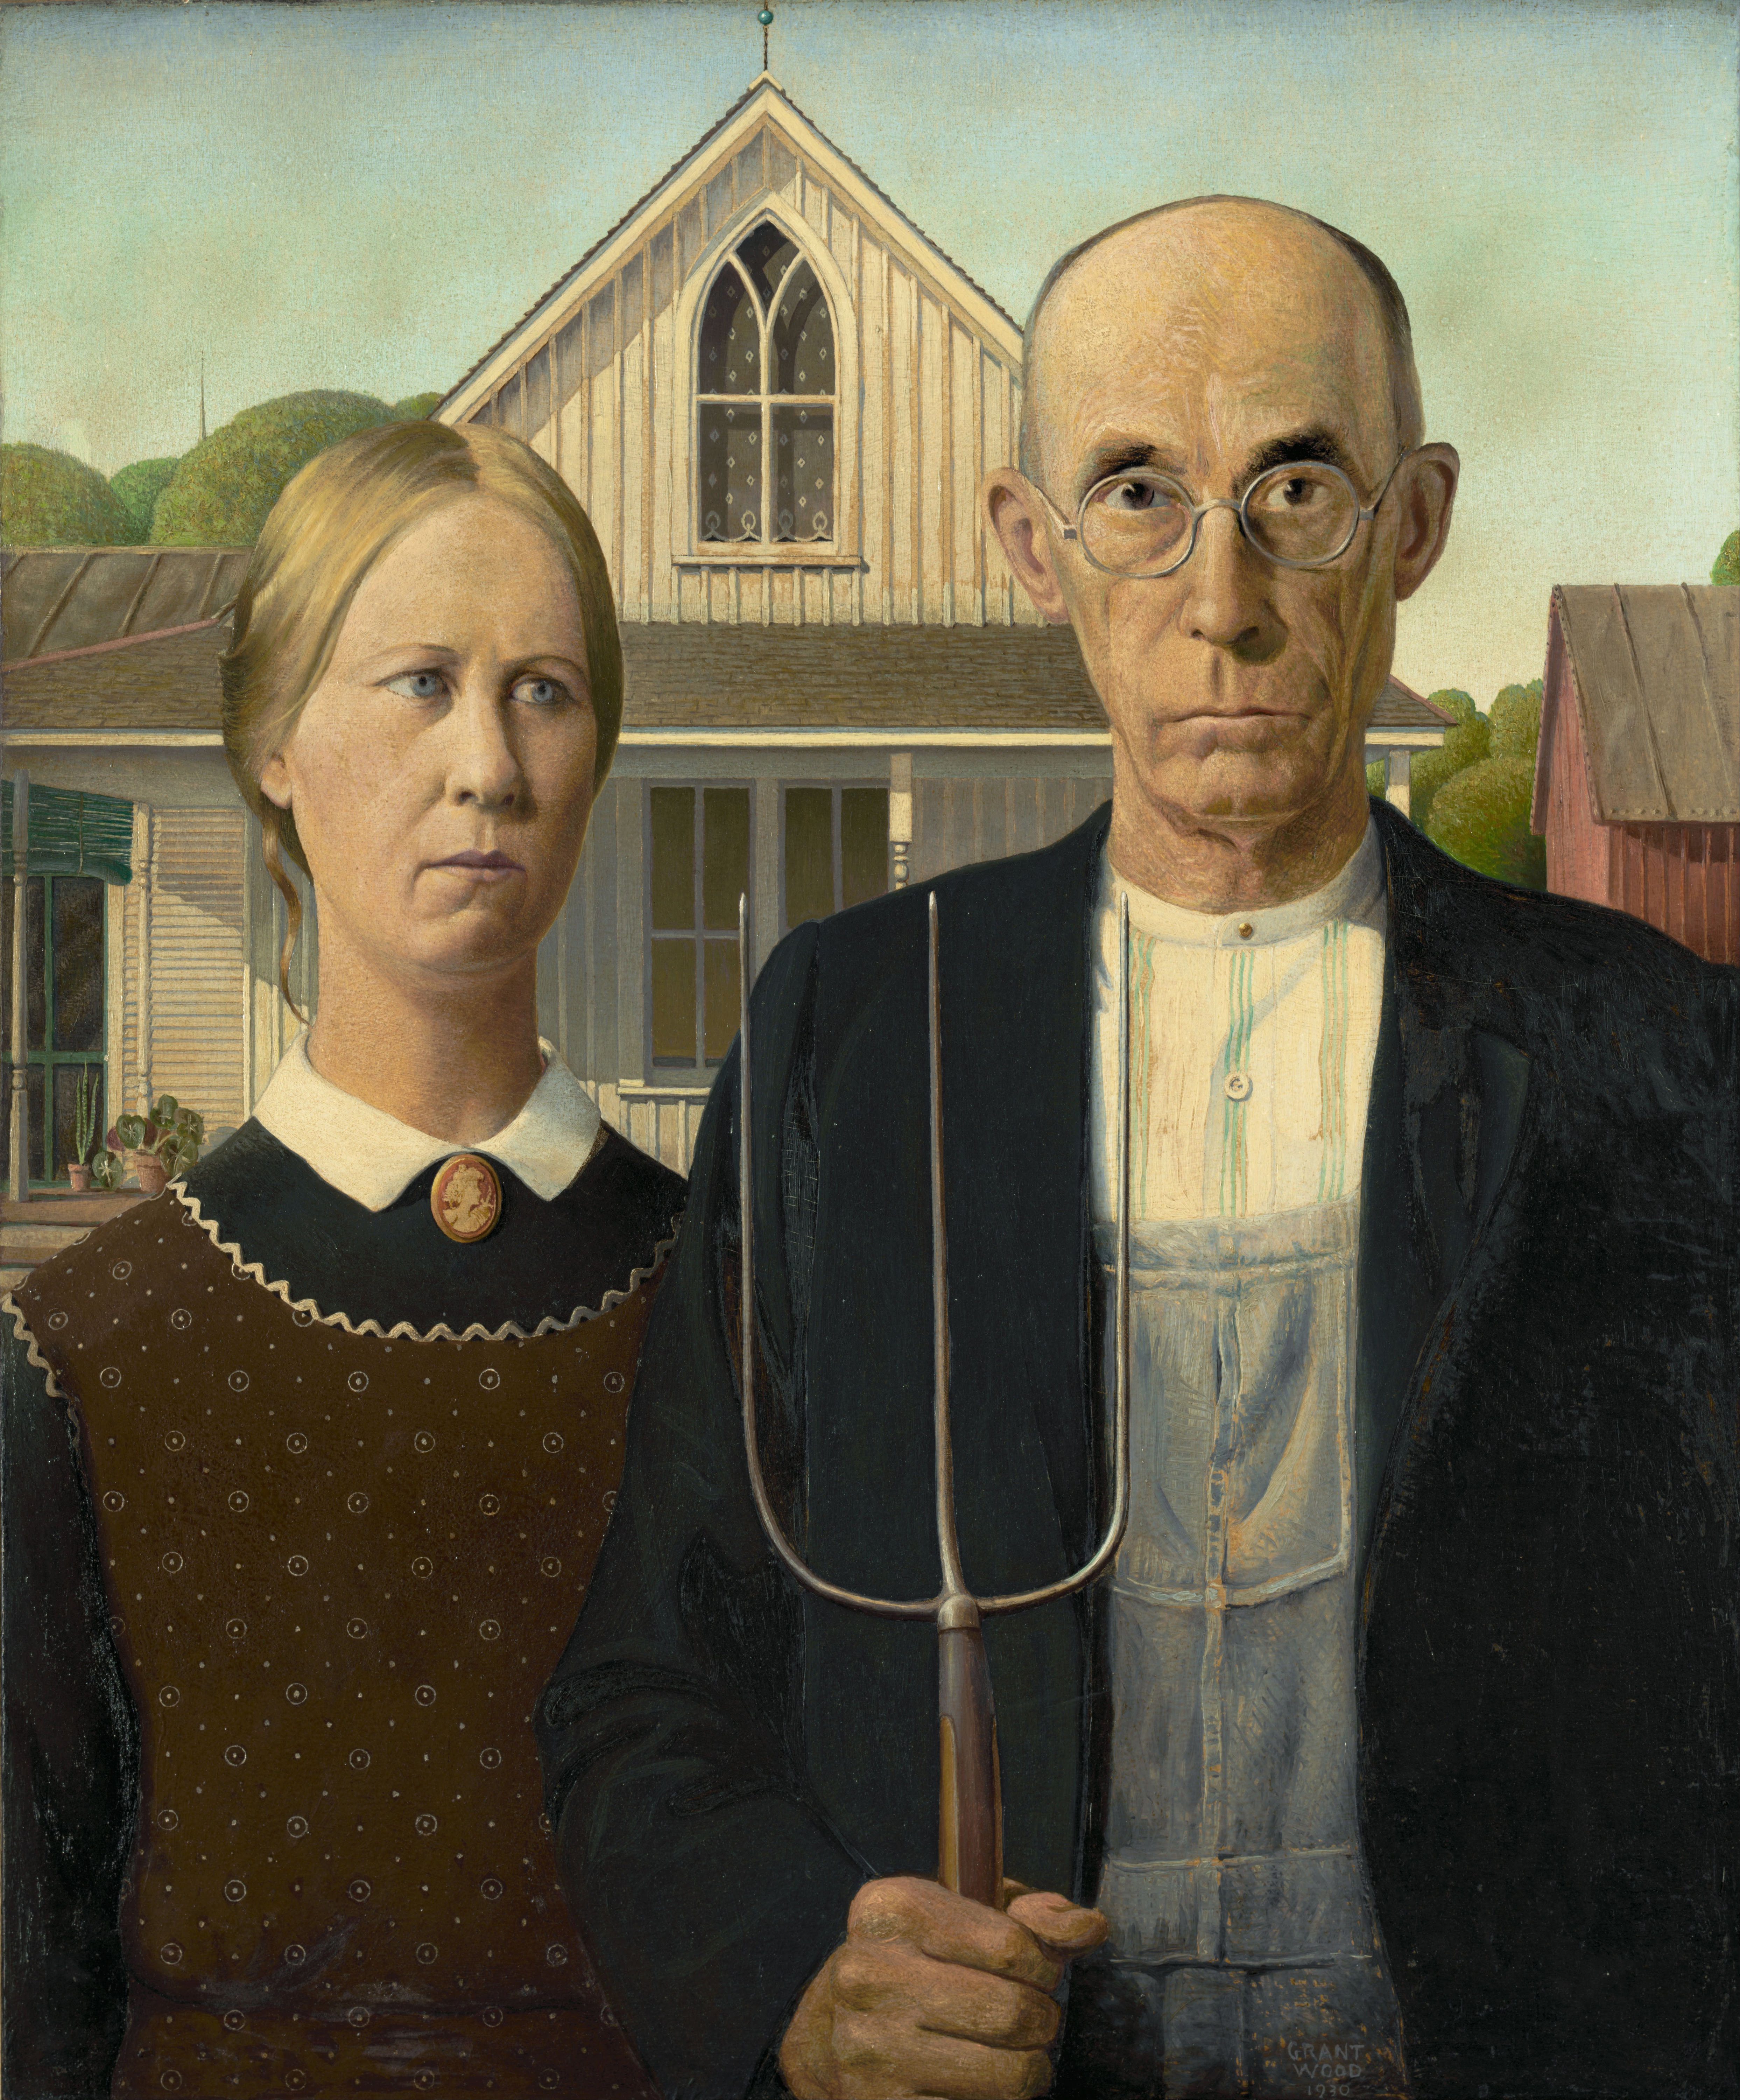 American Gothic by Grant Wood - 1930 - 78 × 65.3 cm 